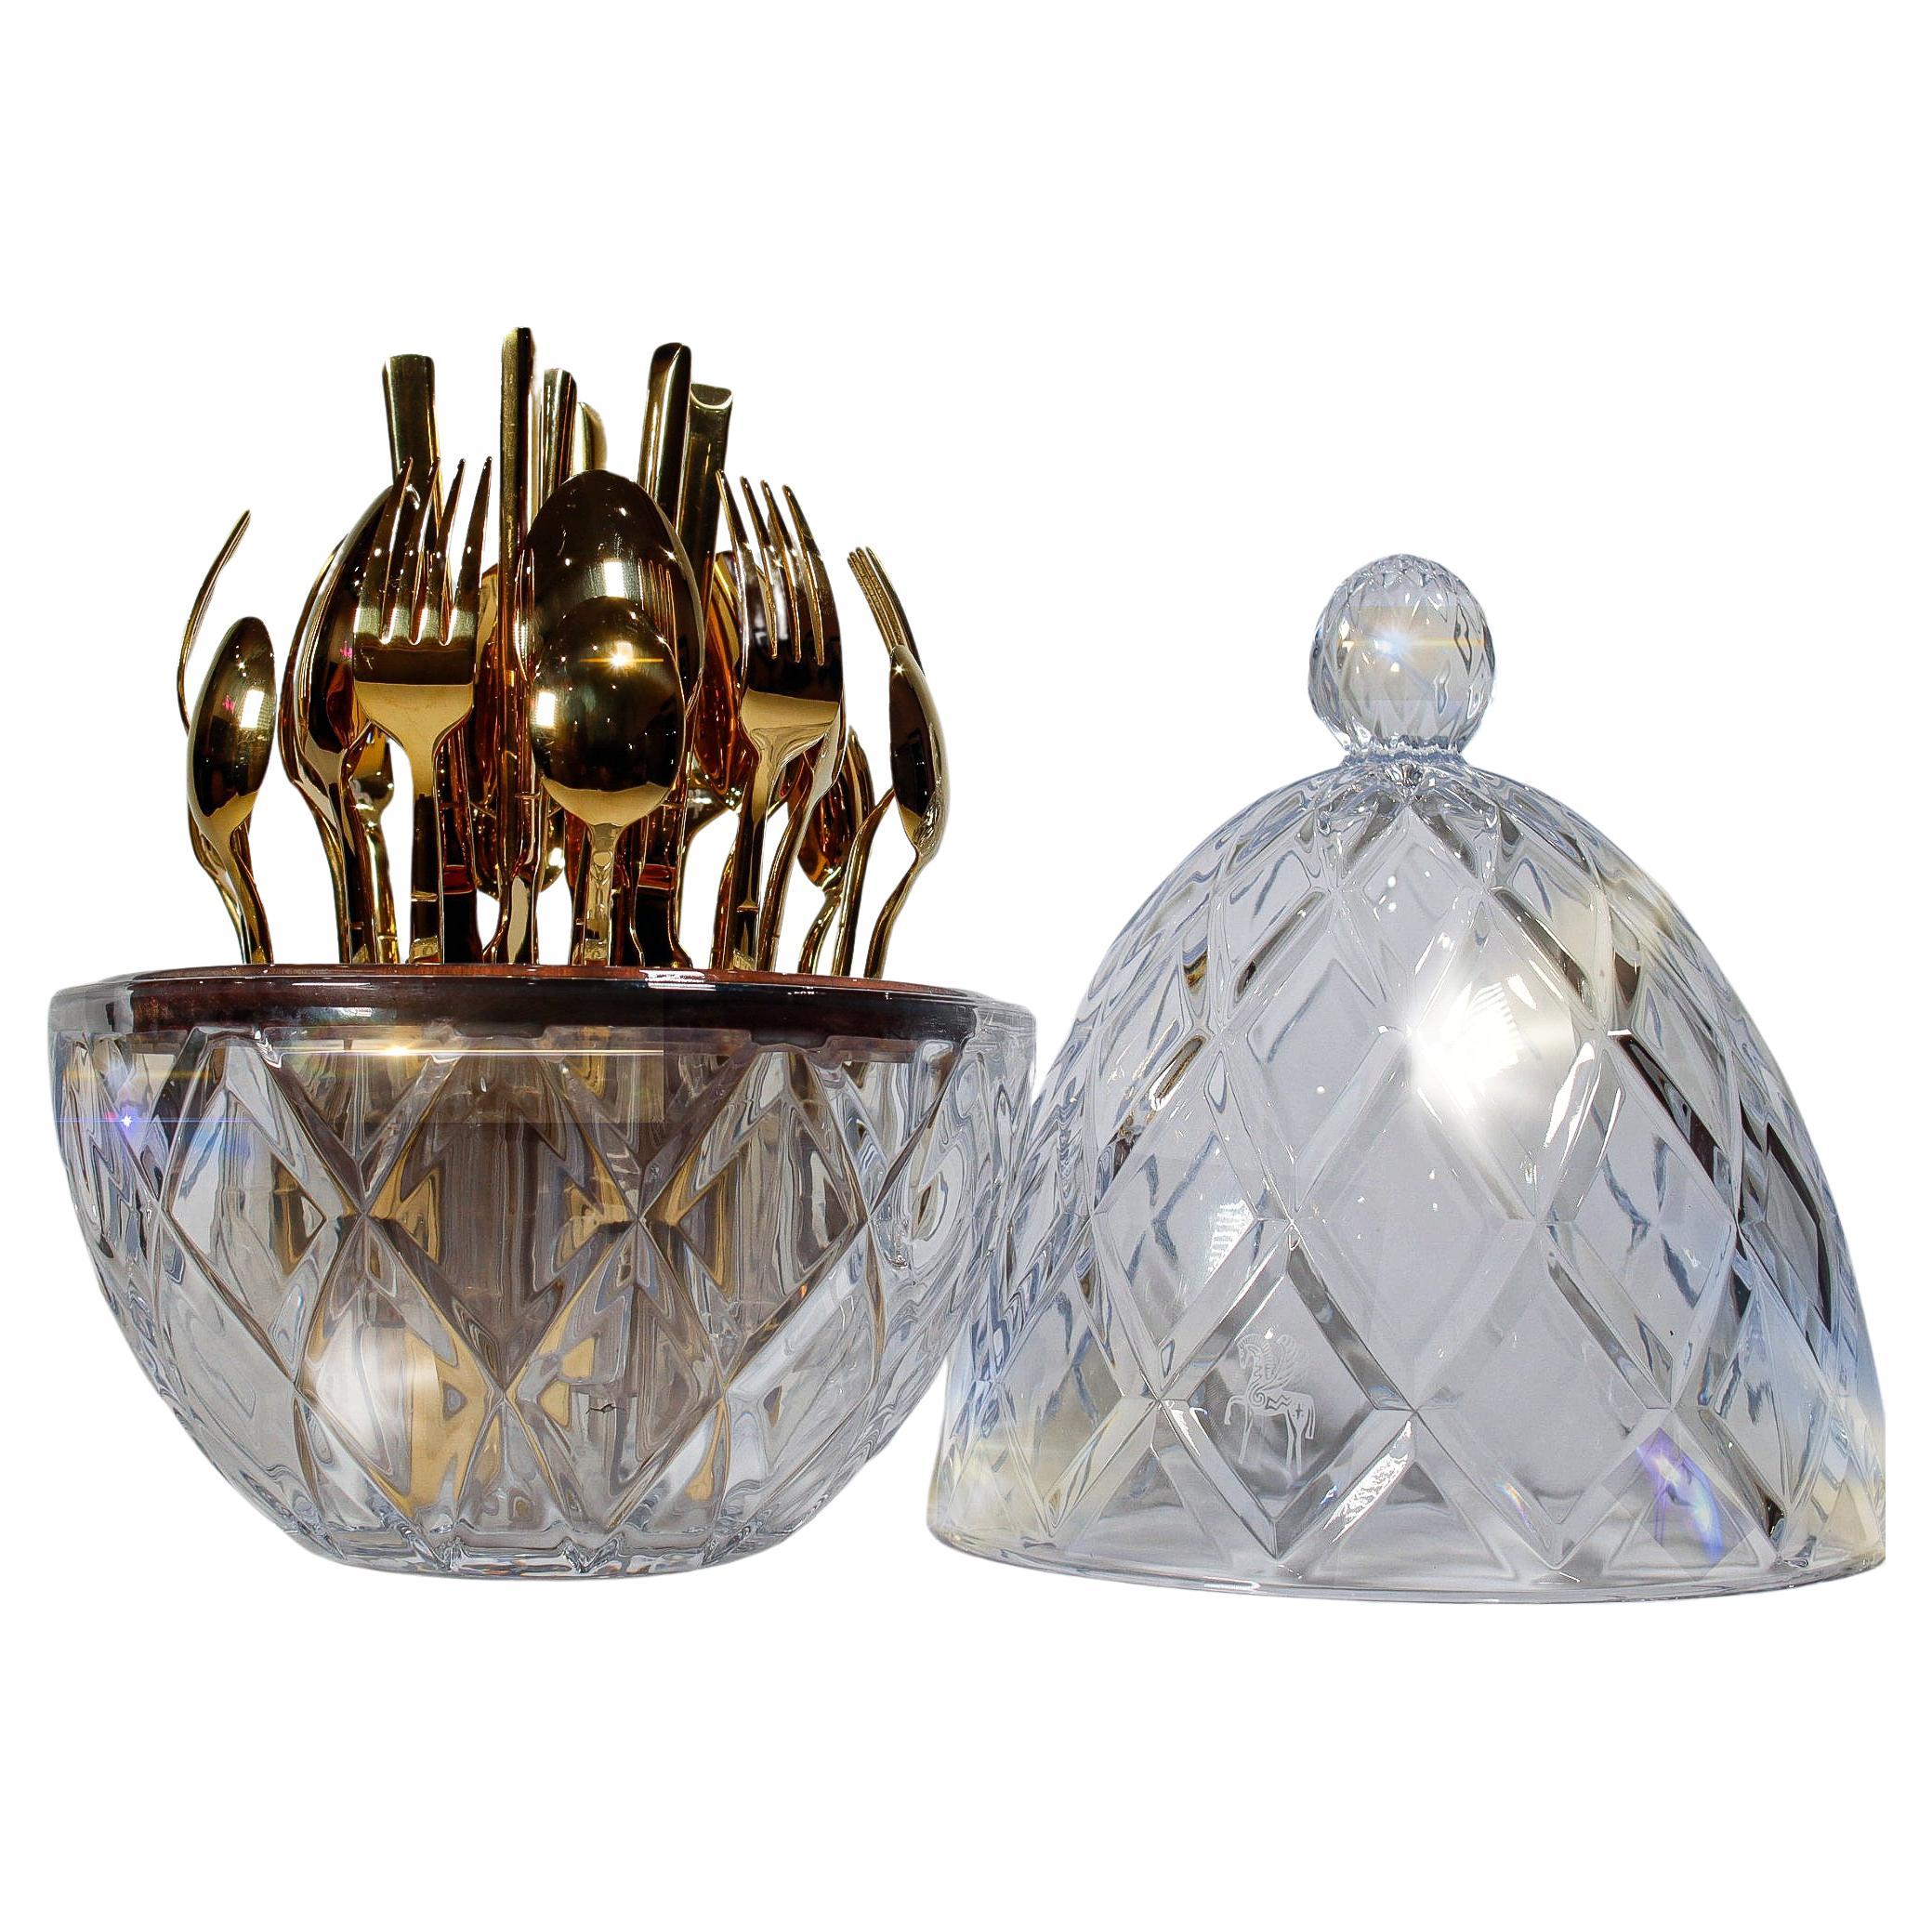 Gold Plated Flatware 24-piece set in a crystal glass Egg holder L’ambrosia. For Sale